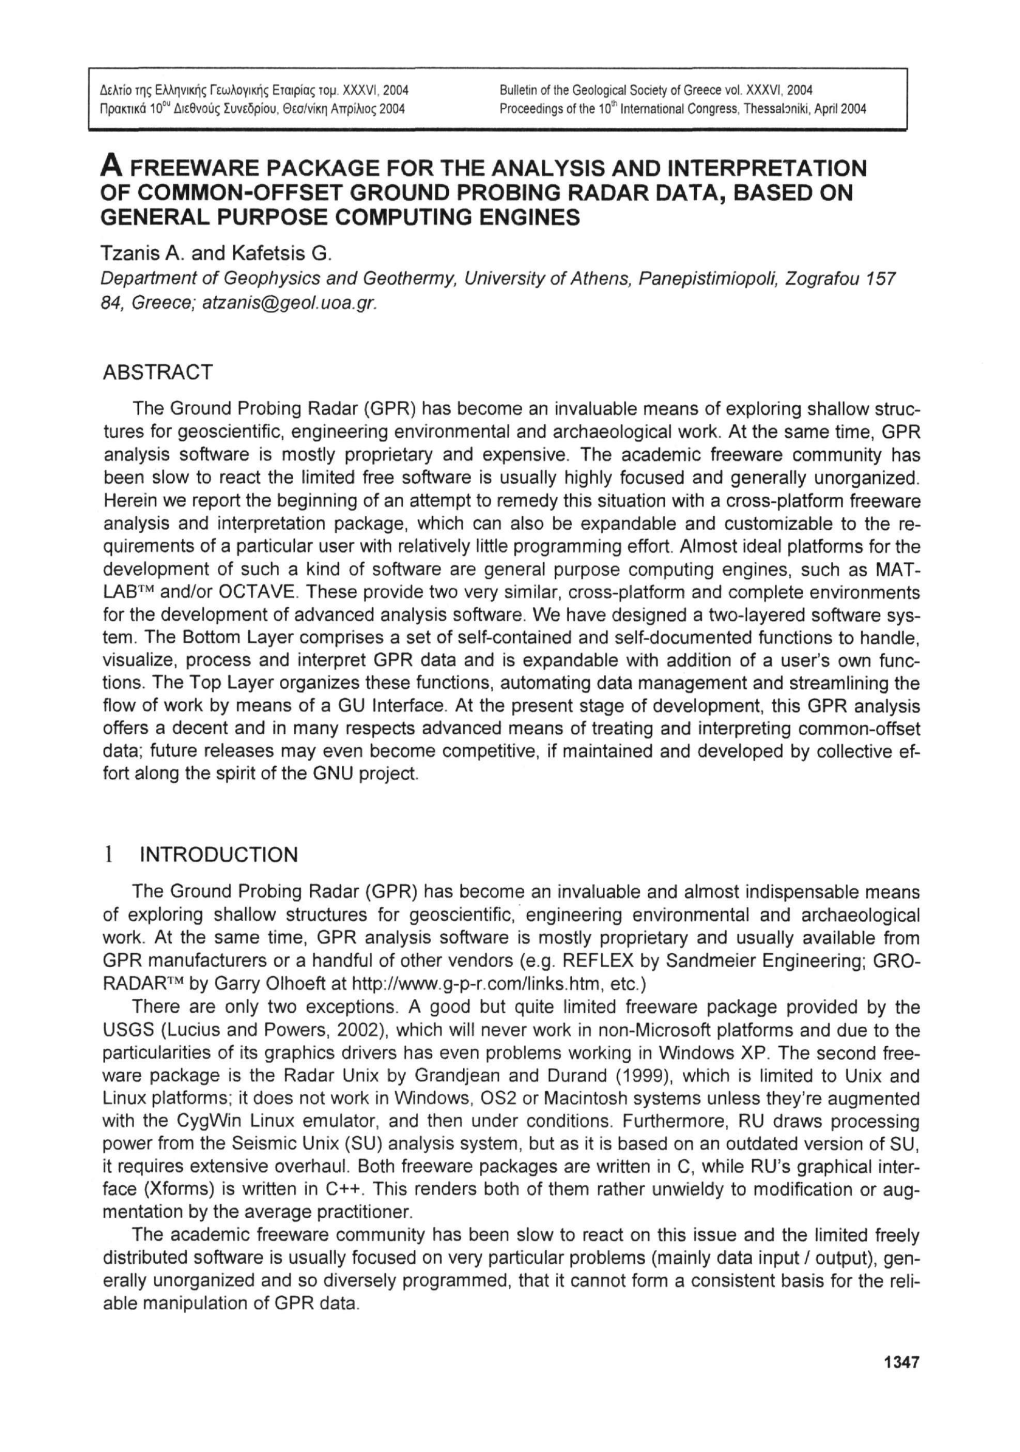 A FREEWARE PACKAGE for the ANALYSIS and INTERPRETATION of COMMON-OFFSET GROUND PROBING RADAR DATA, BASED on GENERAL PURPOSE COMPUTING ENGINES Tzanis A